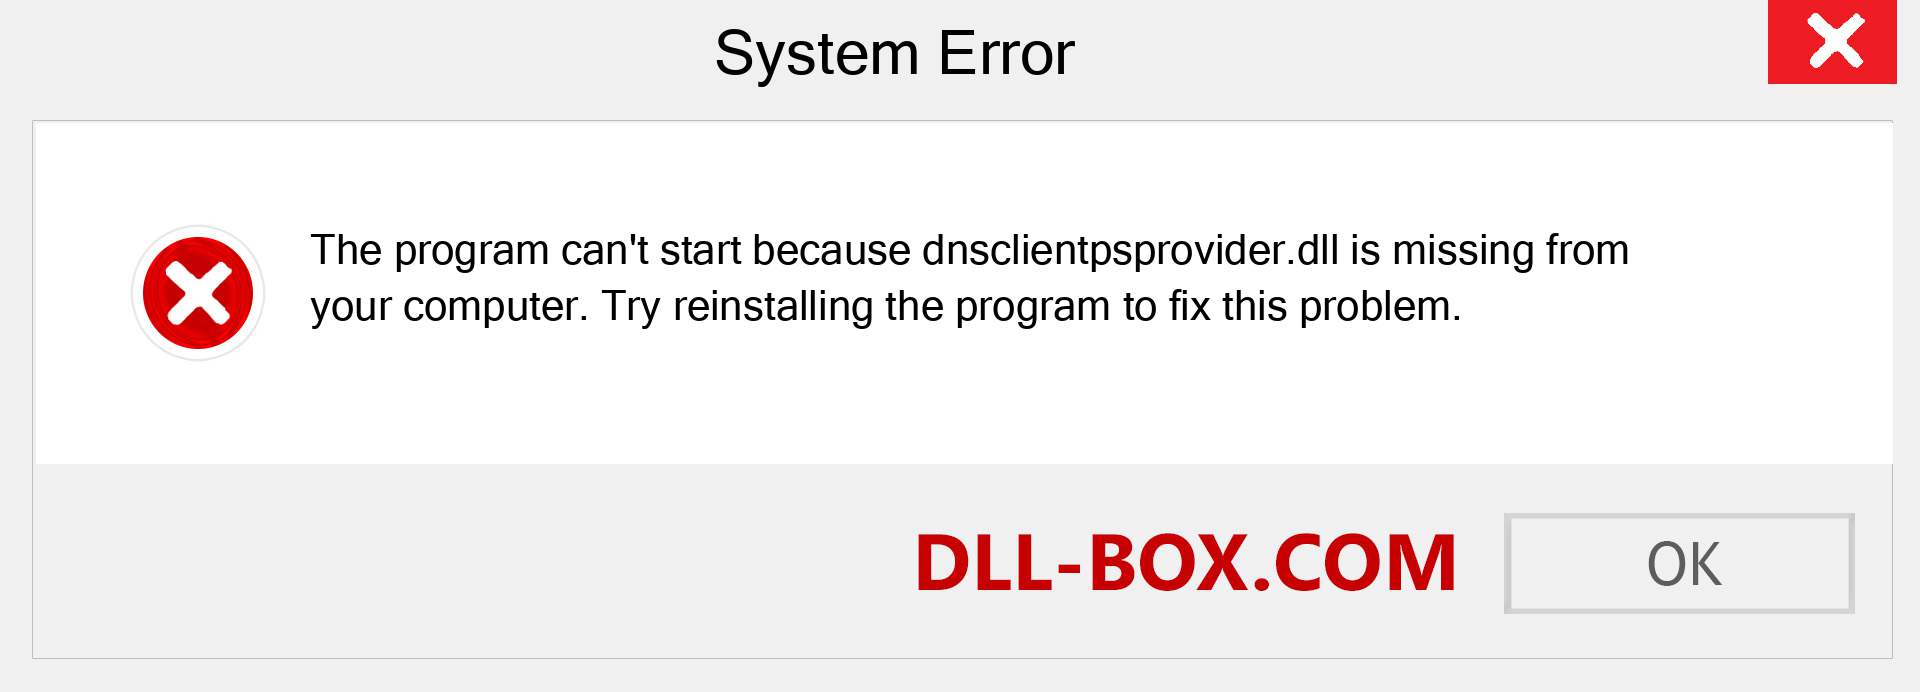  dnsclientpsprovider.dll file is missing?. Download for Windows 7, 8, 10 - Fix  dnsclientpsprovider dll Missing Error on Windows, photos, images